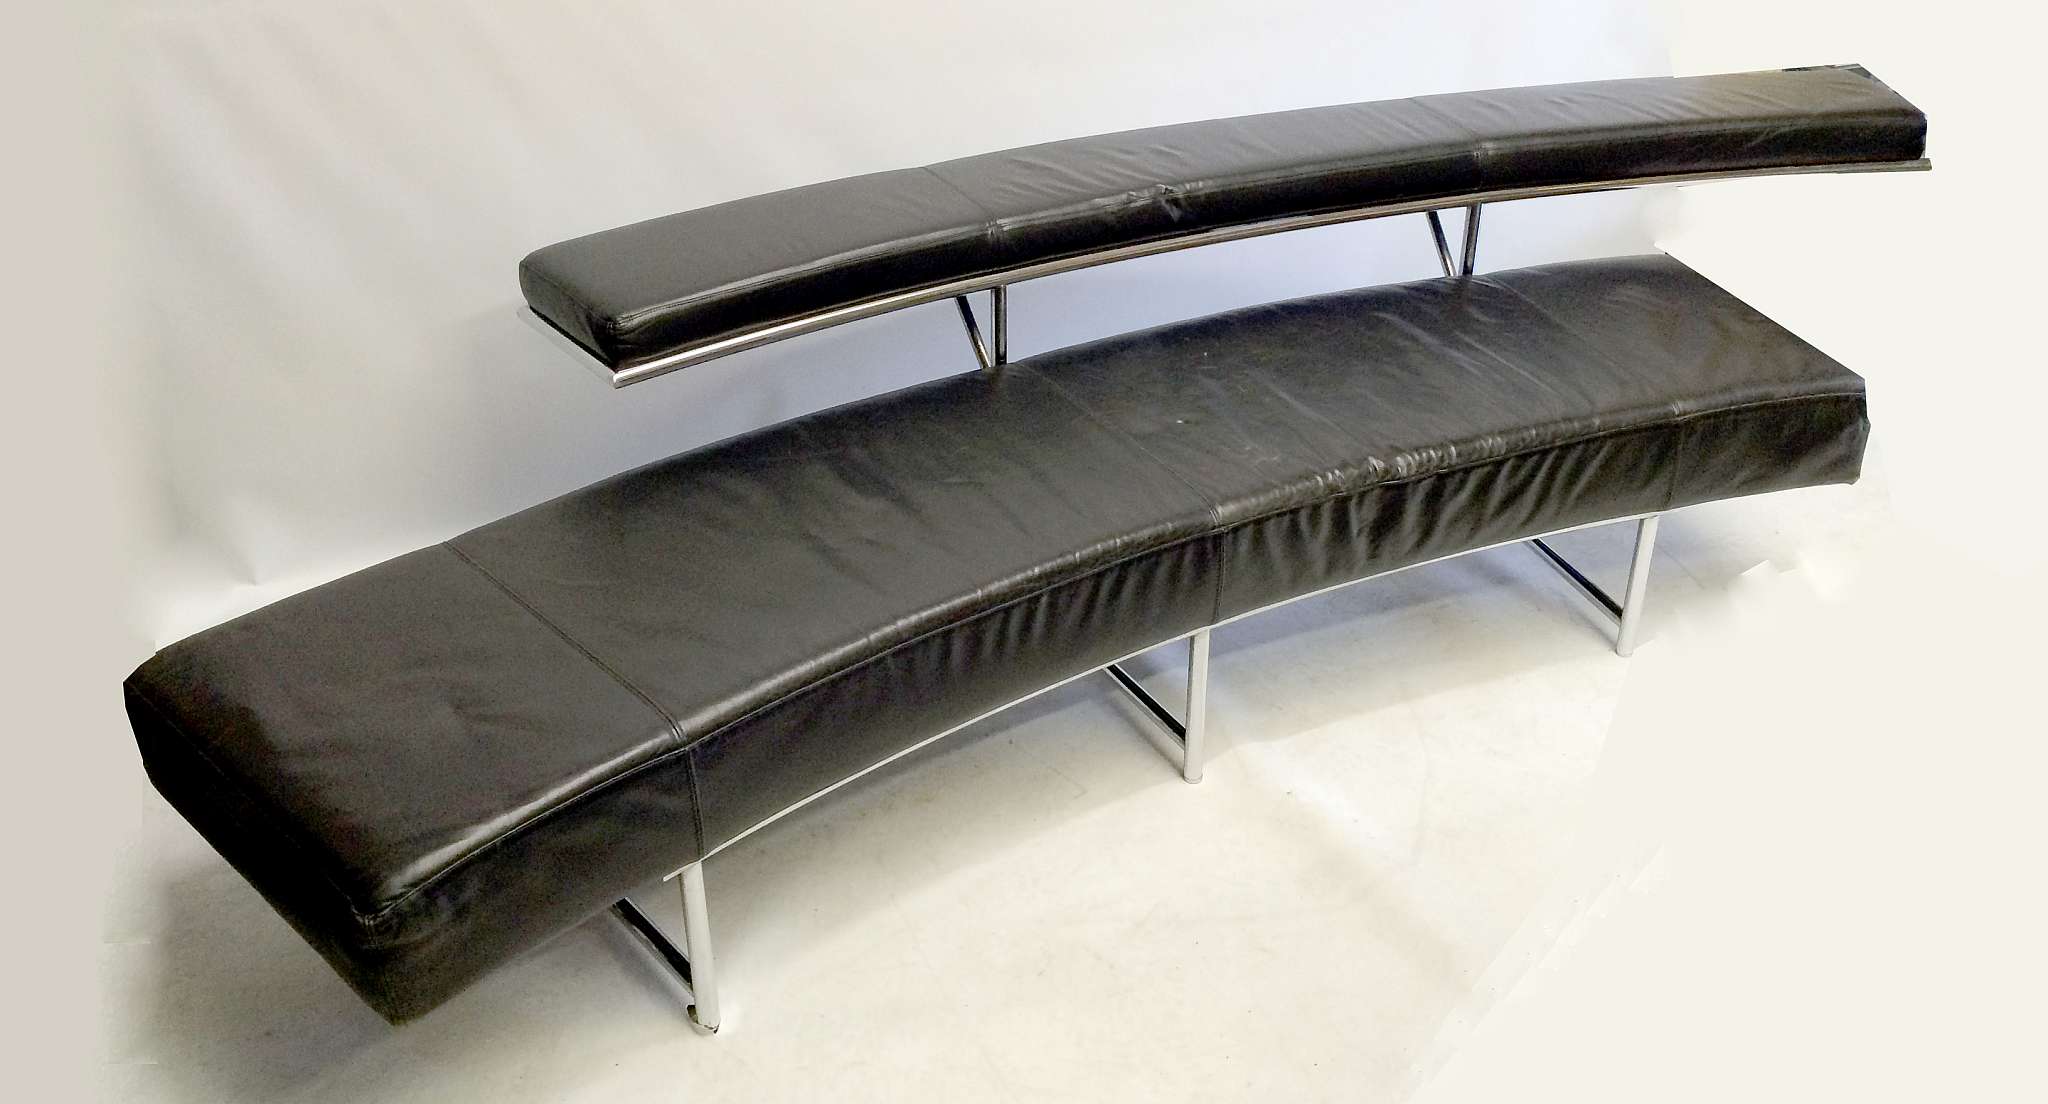 Eileen Gray for Aram Designs, a late 20th century Monte Carlo sofa, black leather seat and back on